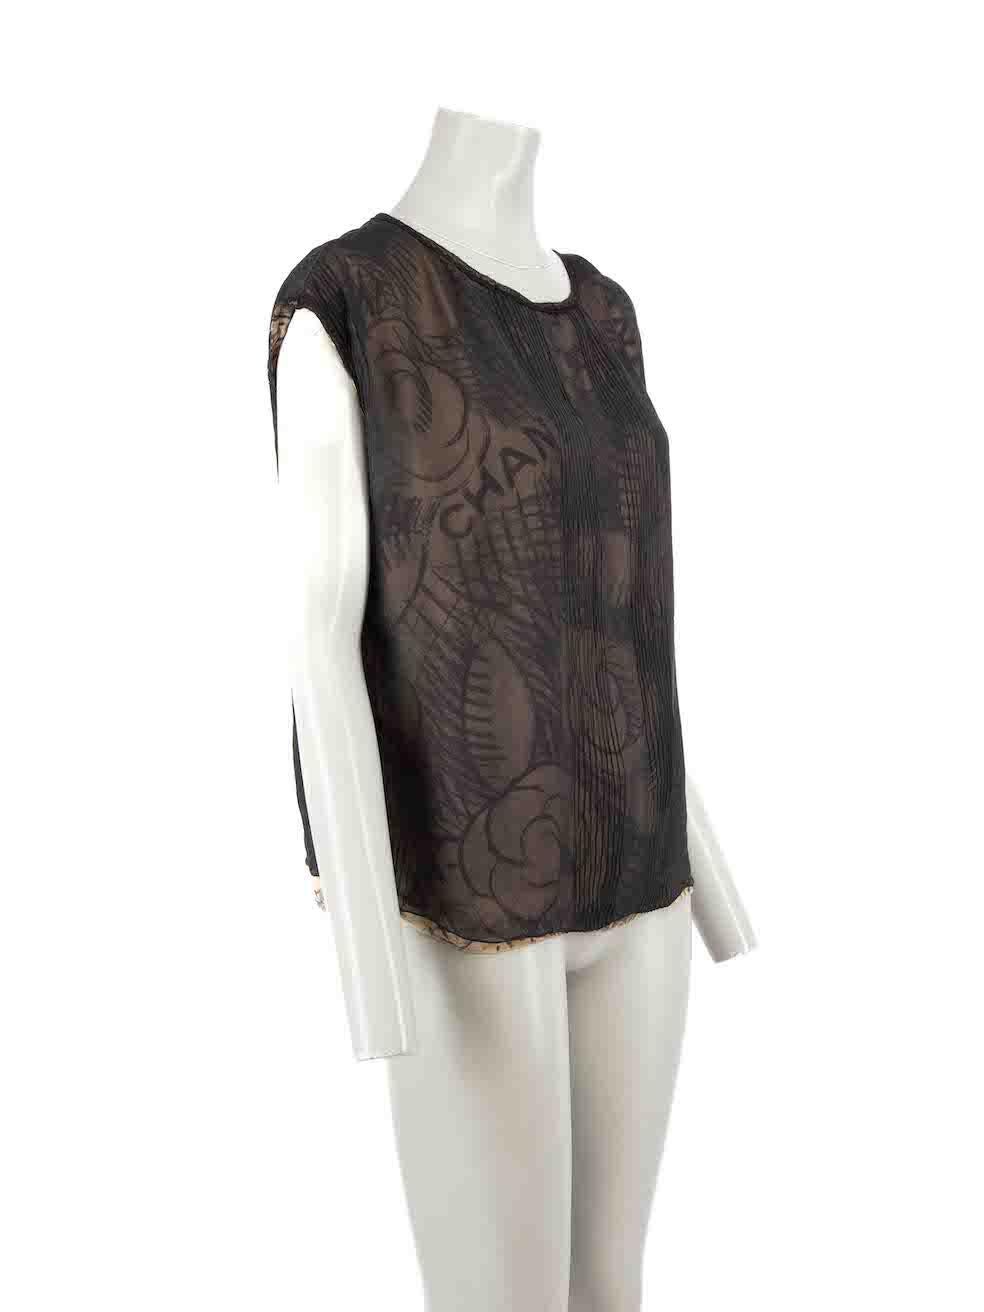 CONDITION is Very good. Minimal wear to top is evident. Minimal wear to fabric composition with a handful of small pulls and plucks to the weave found near the hem on this used Chanel designer resale item.
 
 Details
 Vintage
 Black
 Silk
 Top
